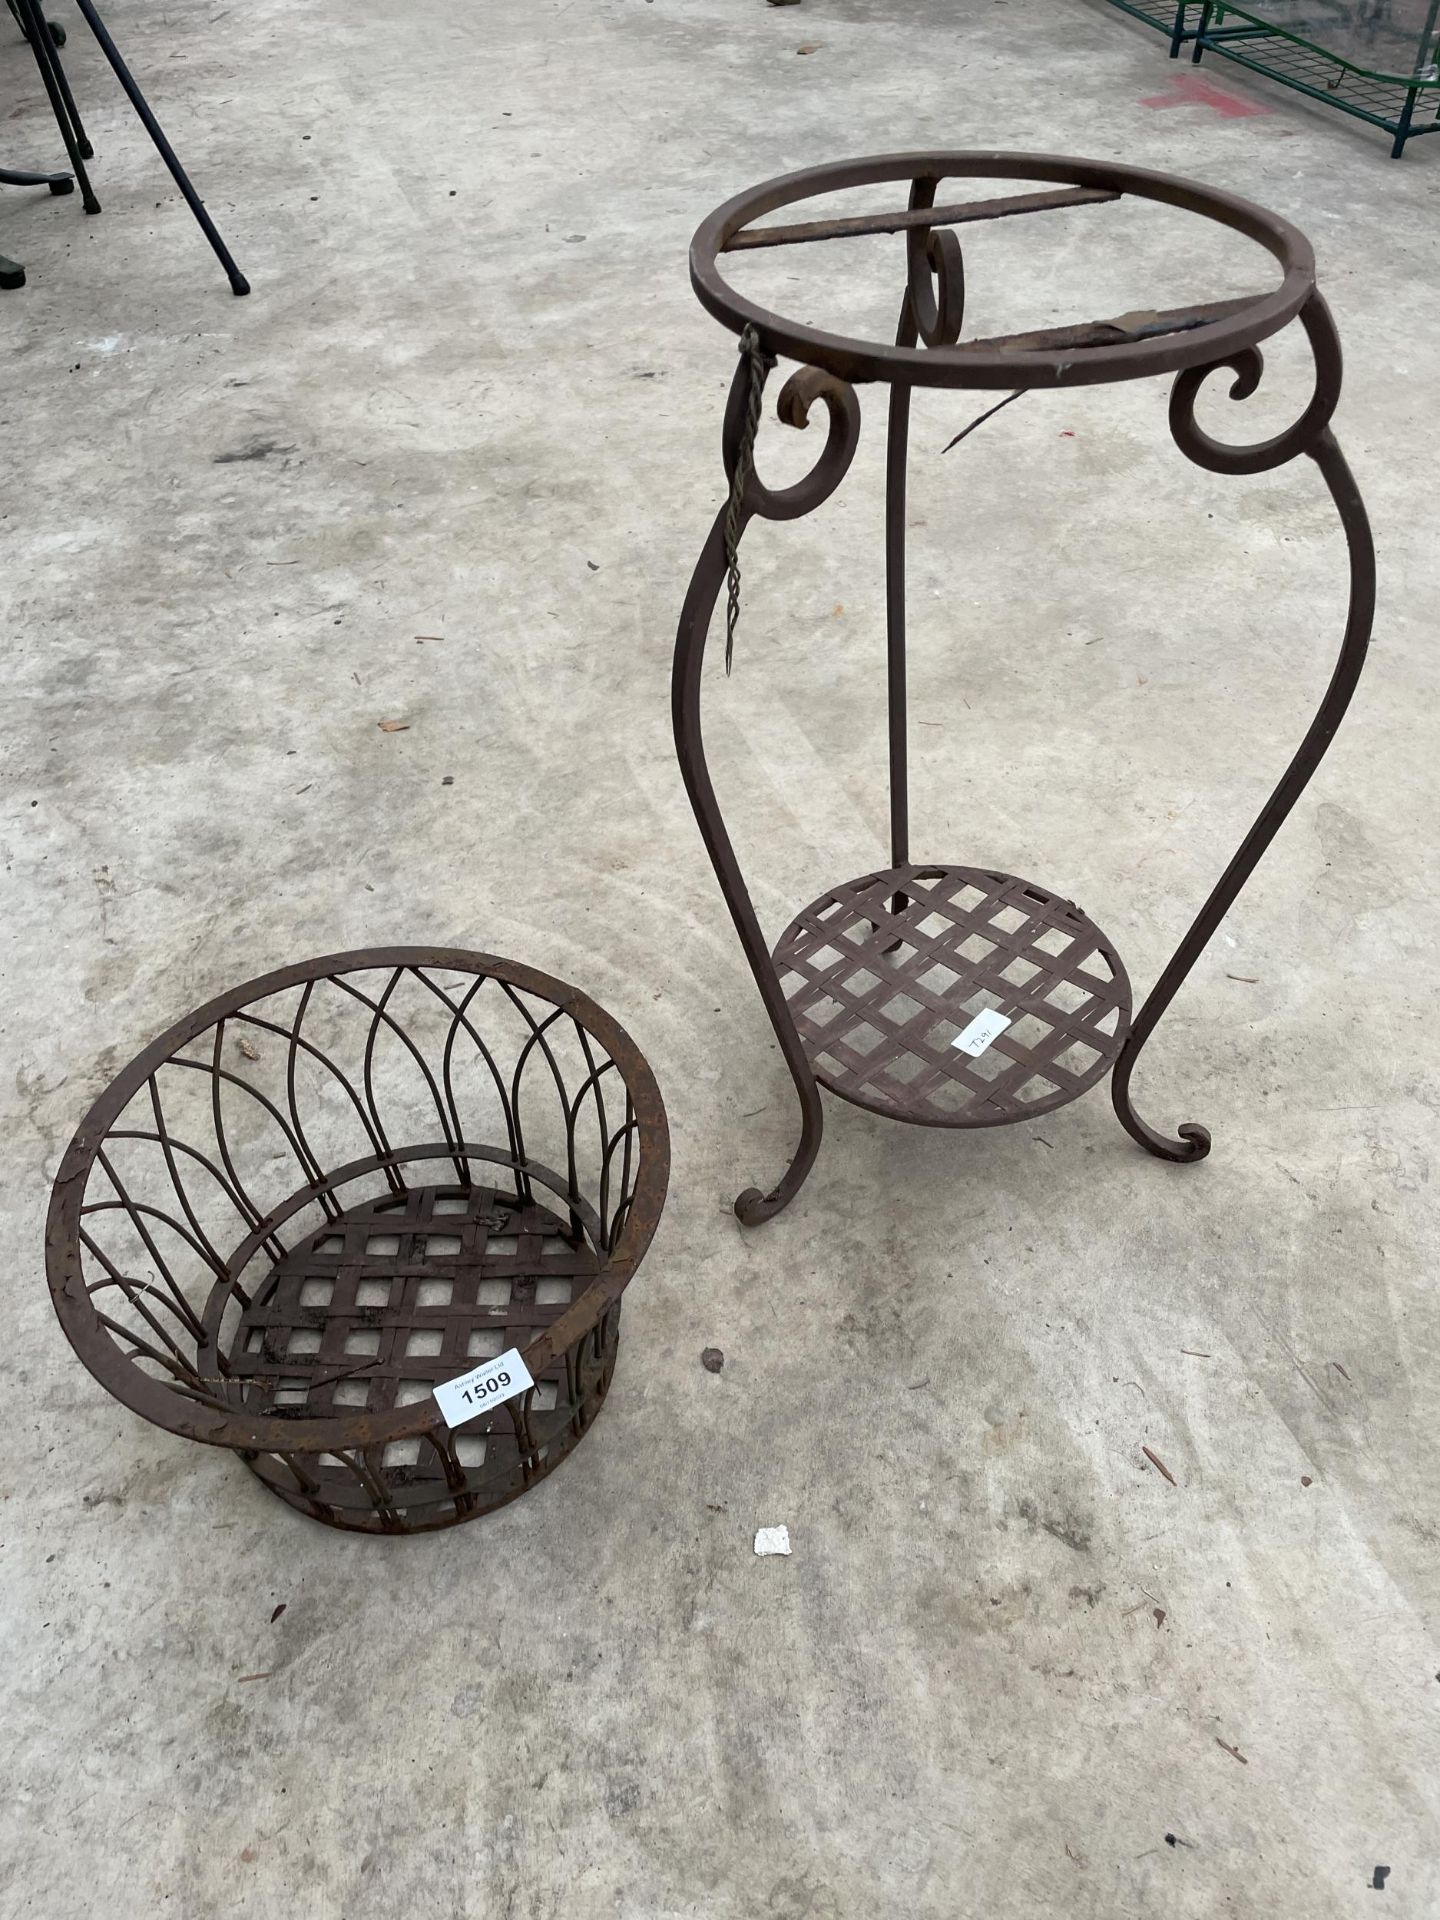 A VINTAGE METAL PLANT STAND WITH WIRE BASKET TOP - Image 3 of 3